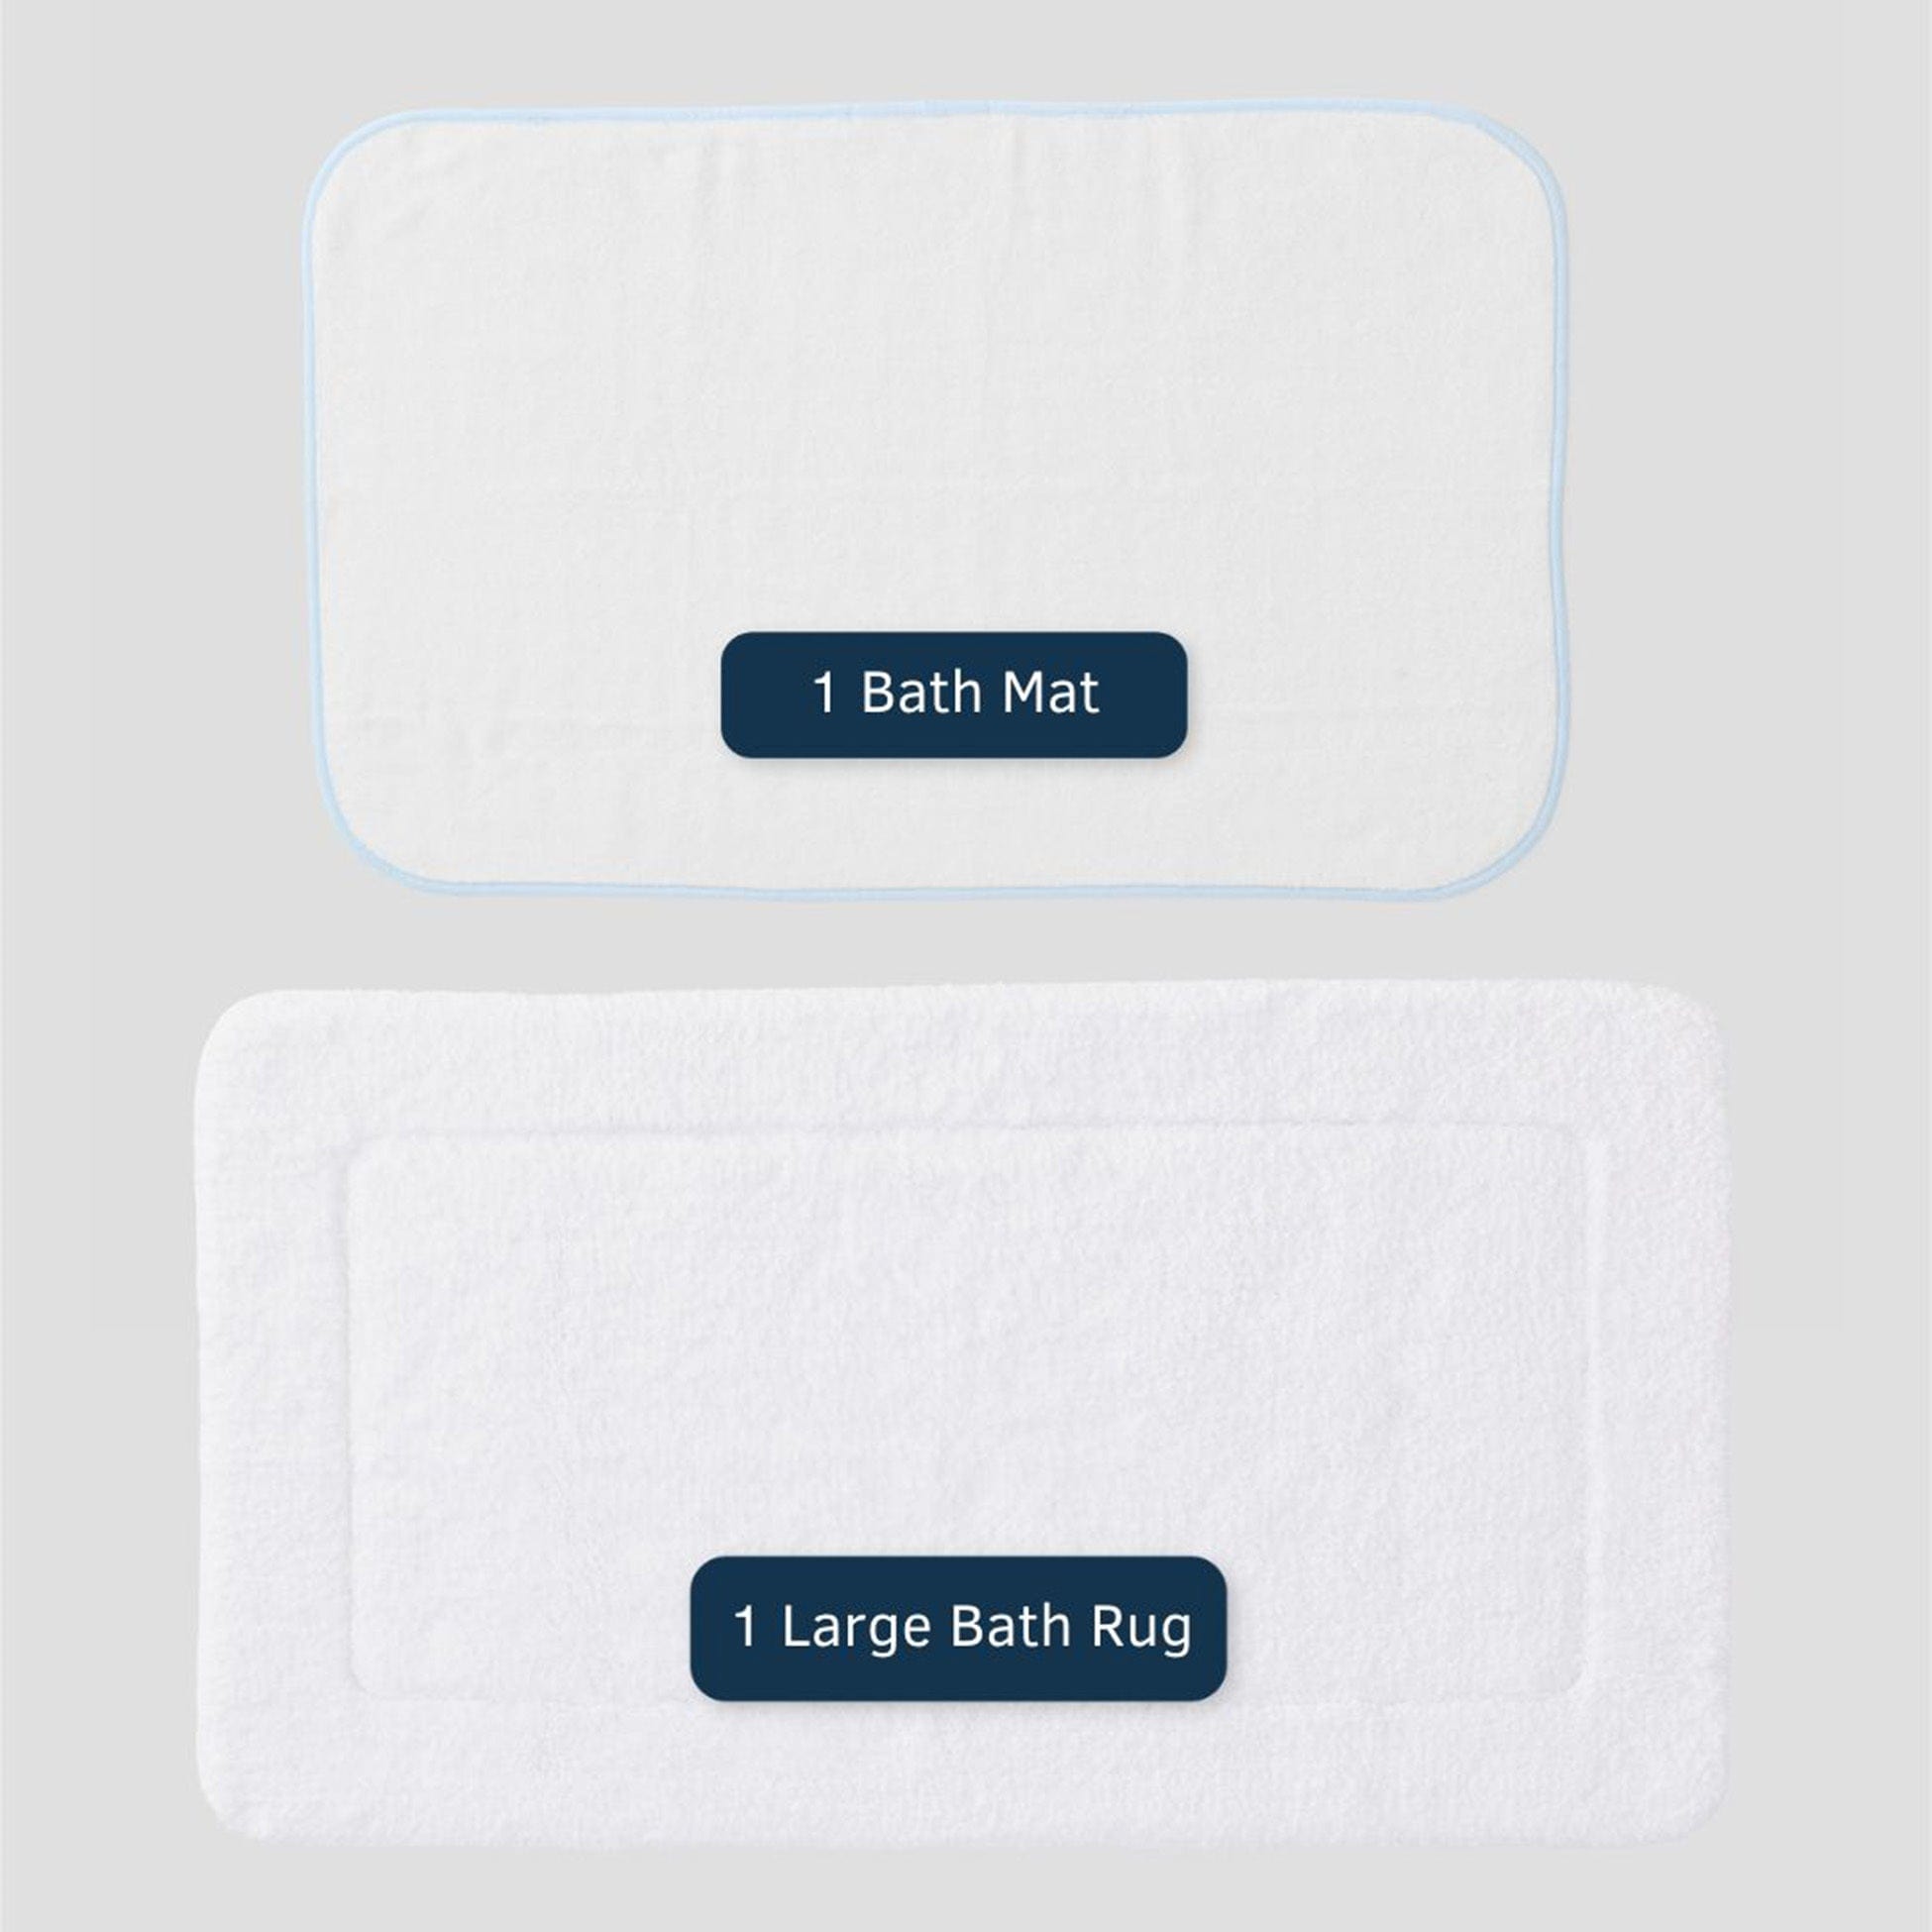 The Smiry Luxury Bath Mat Is on Sale for as Little as $10